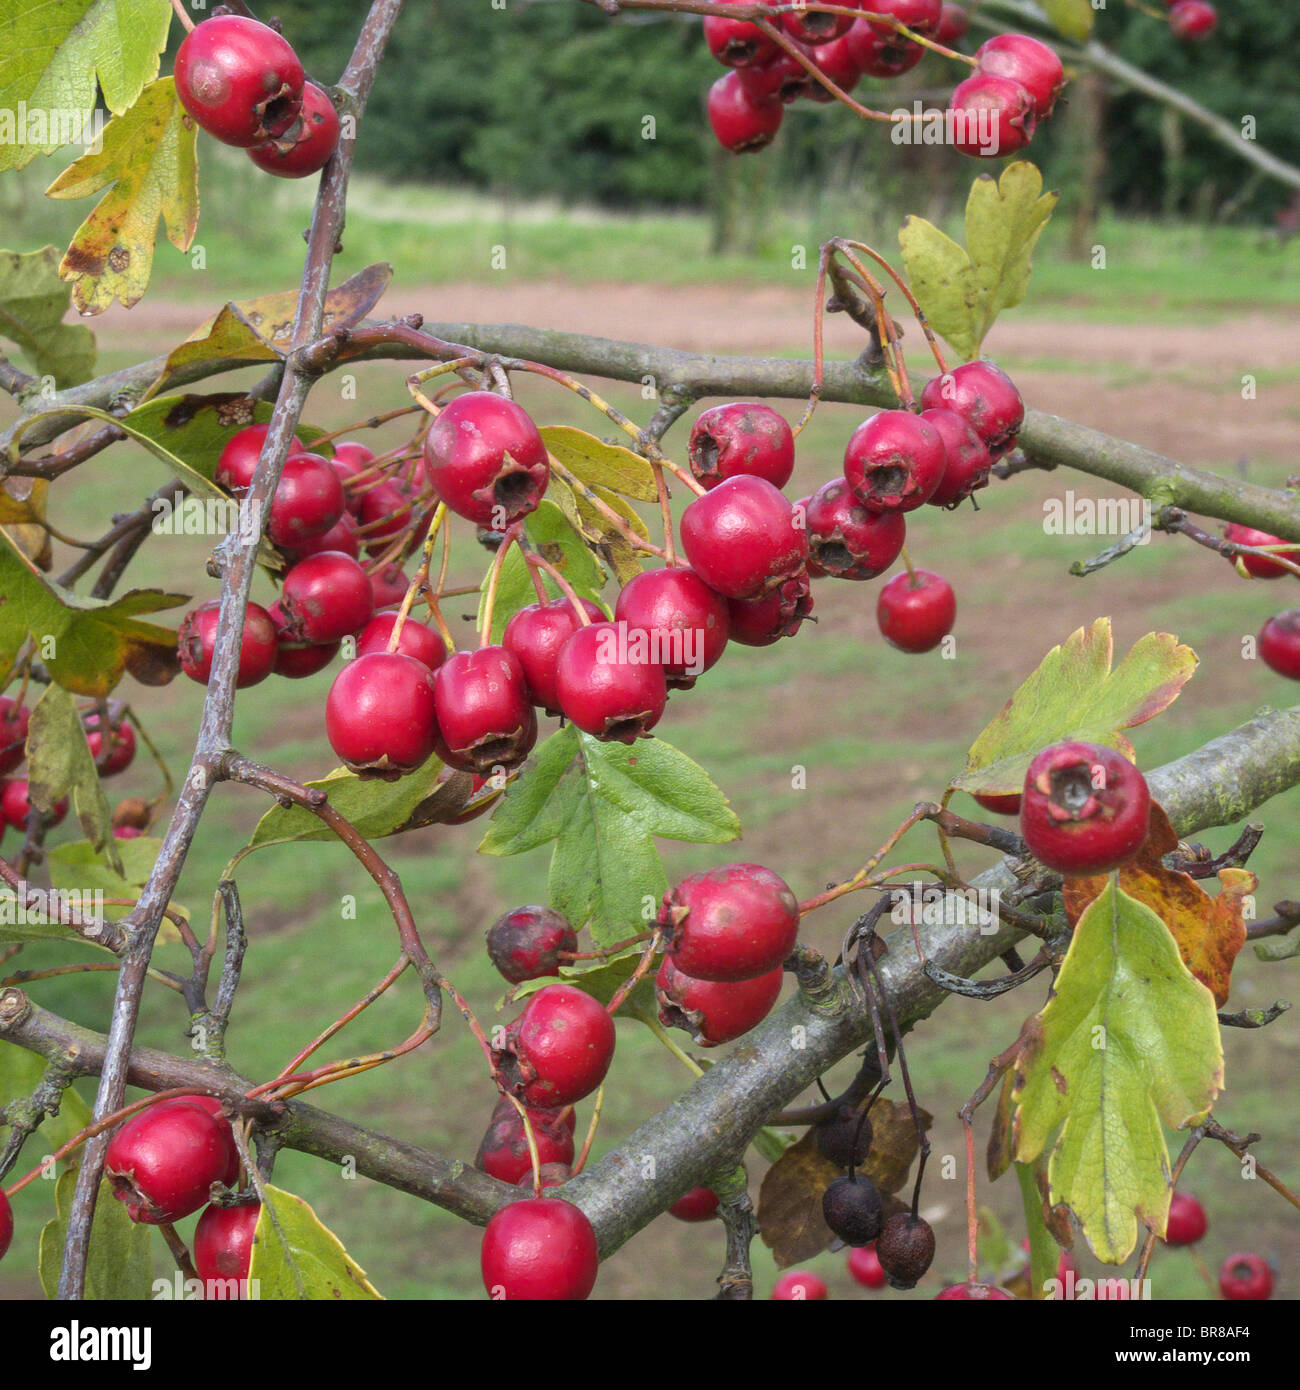 Close Up Of Red Berries On A Common Hawthorn (Crataegus monogyna) Tree In September, UK Stock Photo